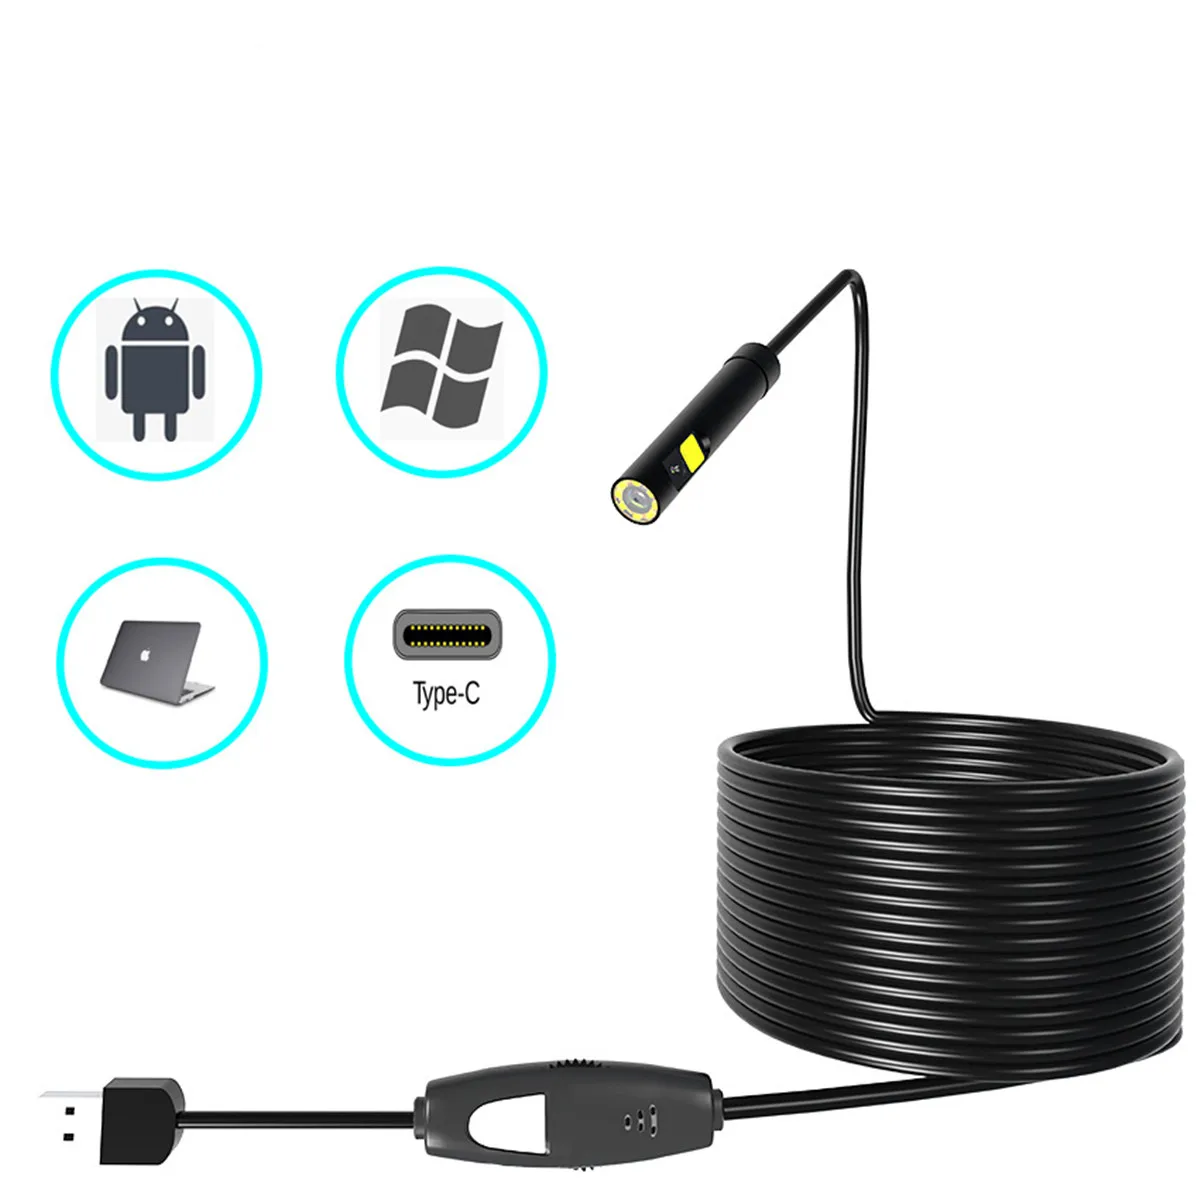 2MP 8MM 3in1 USB Dual Lens Endoscope Camera For Android&Computer CMOS Borescope Inspection  Digital Microscope Otoscope 3in1 usb 5 5mm endoscope camera cmos borescope inspection otoscope camera for android and computer digital microscope